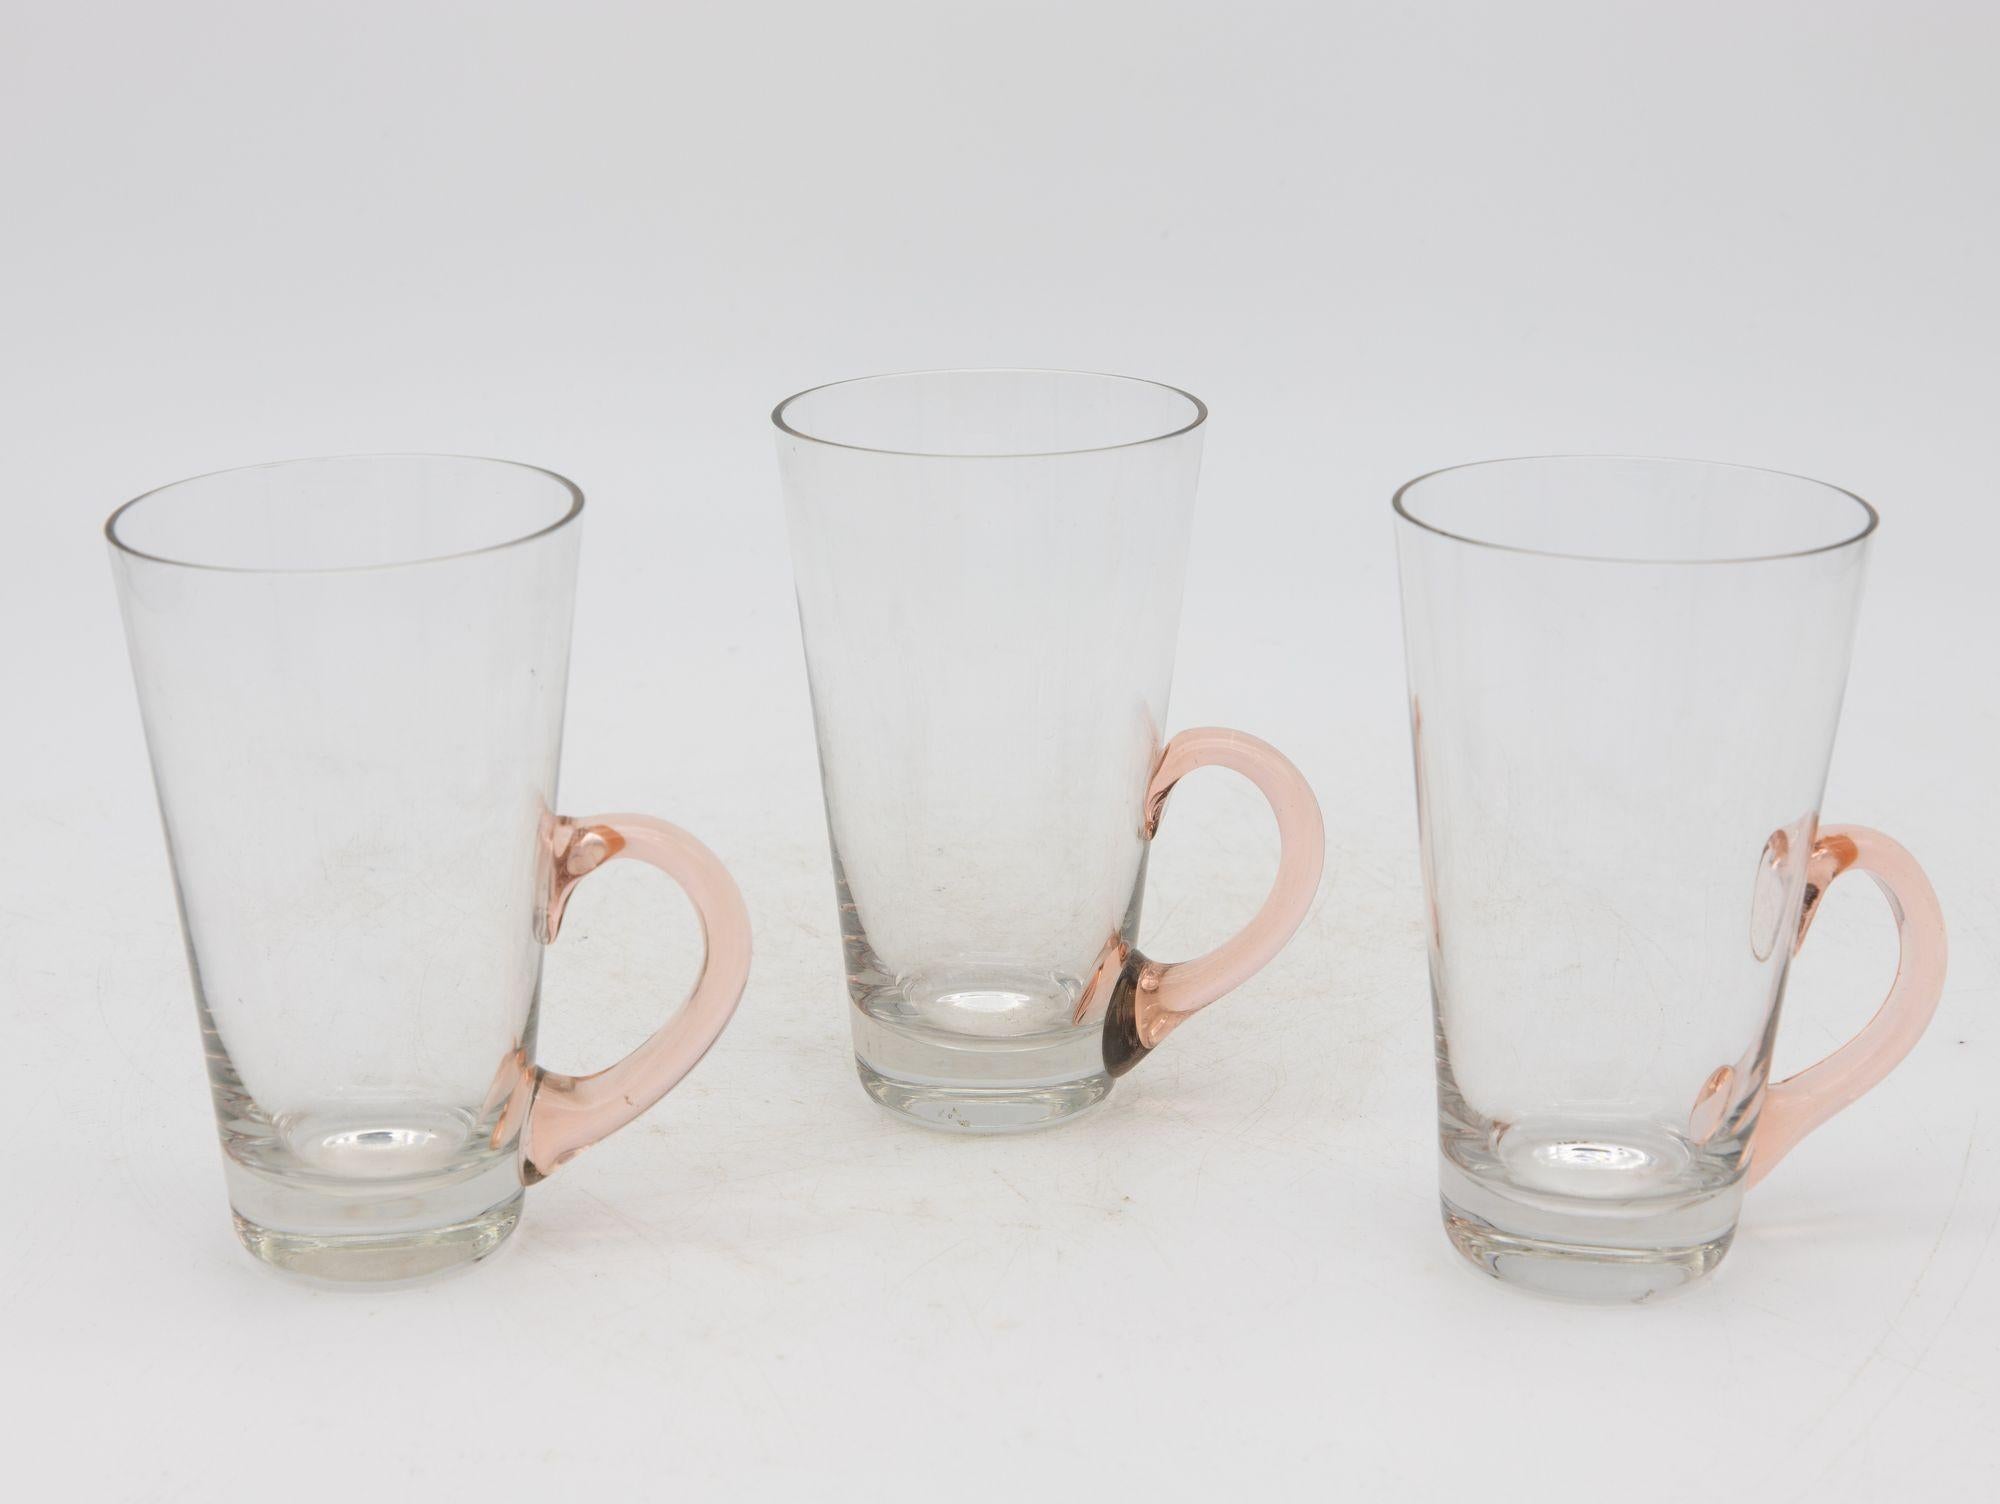 Set of Eight Vintage Hot Toddy Glasses with Colorful Handles In Good Condition For Sale In South Salem, NY